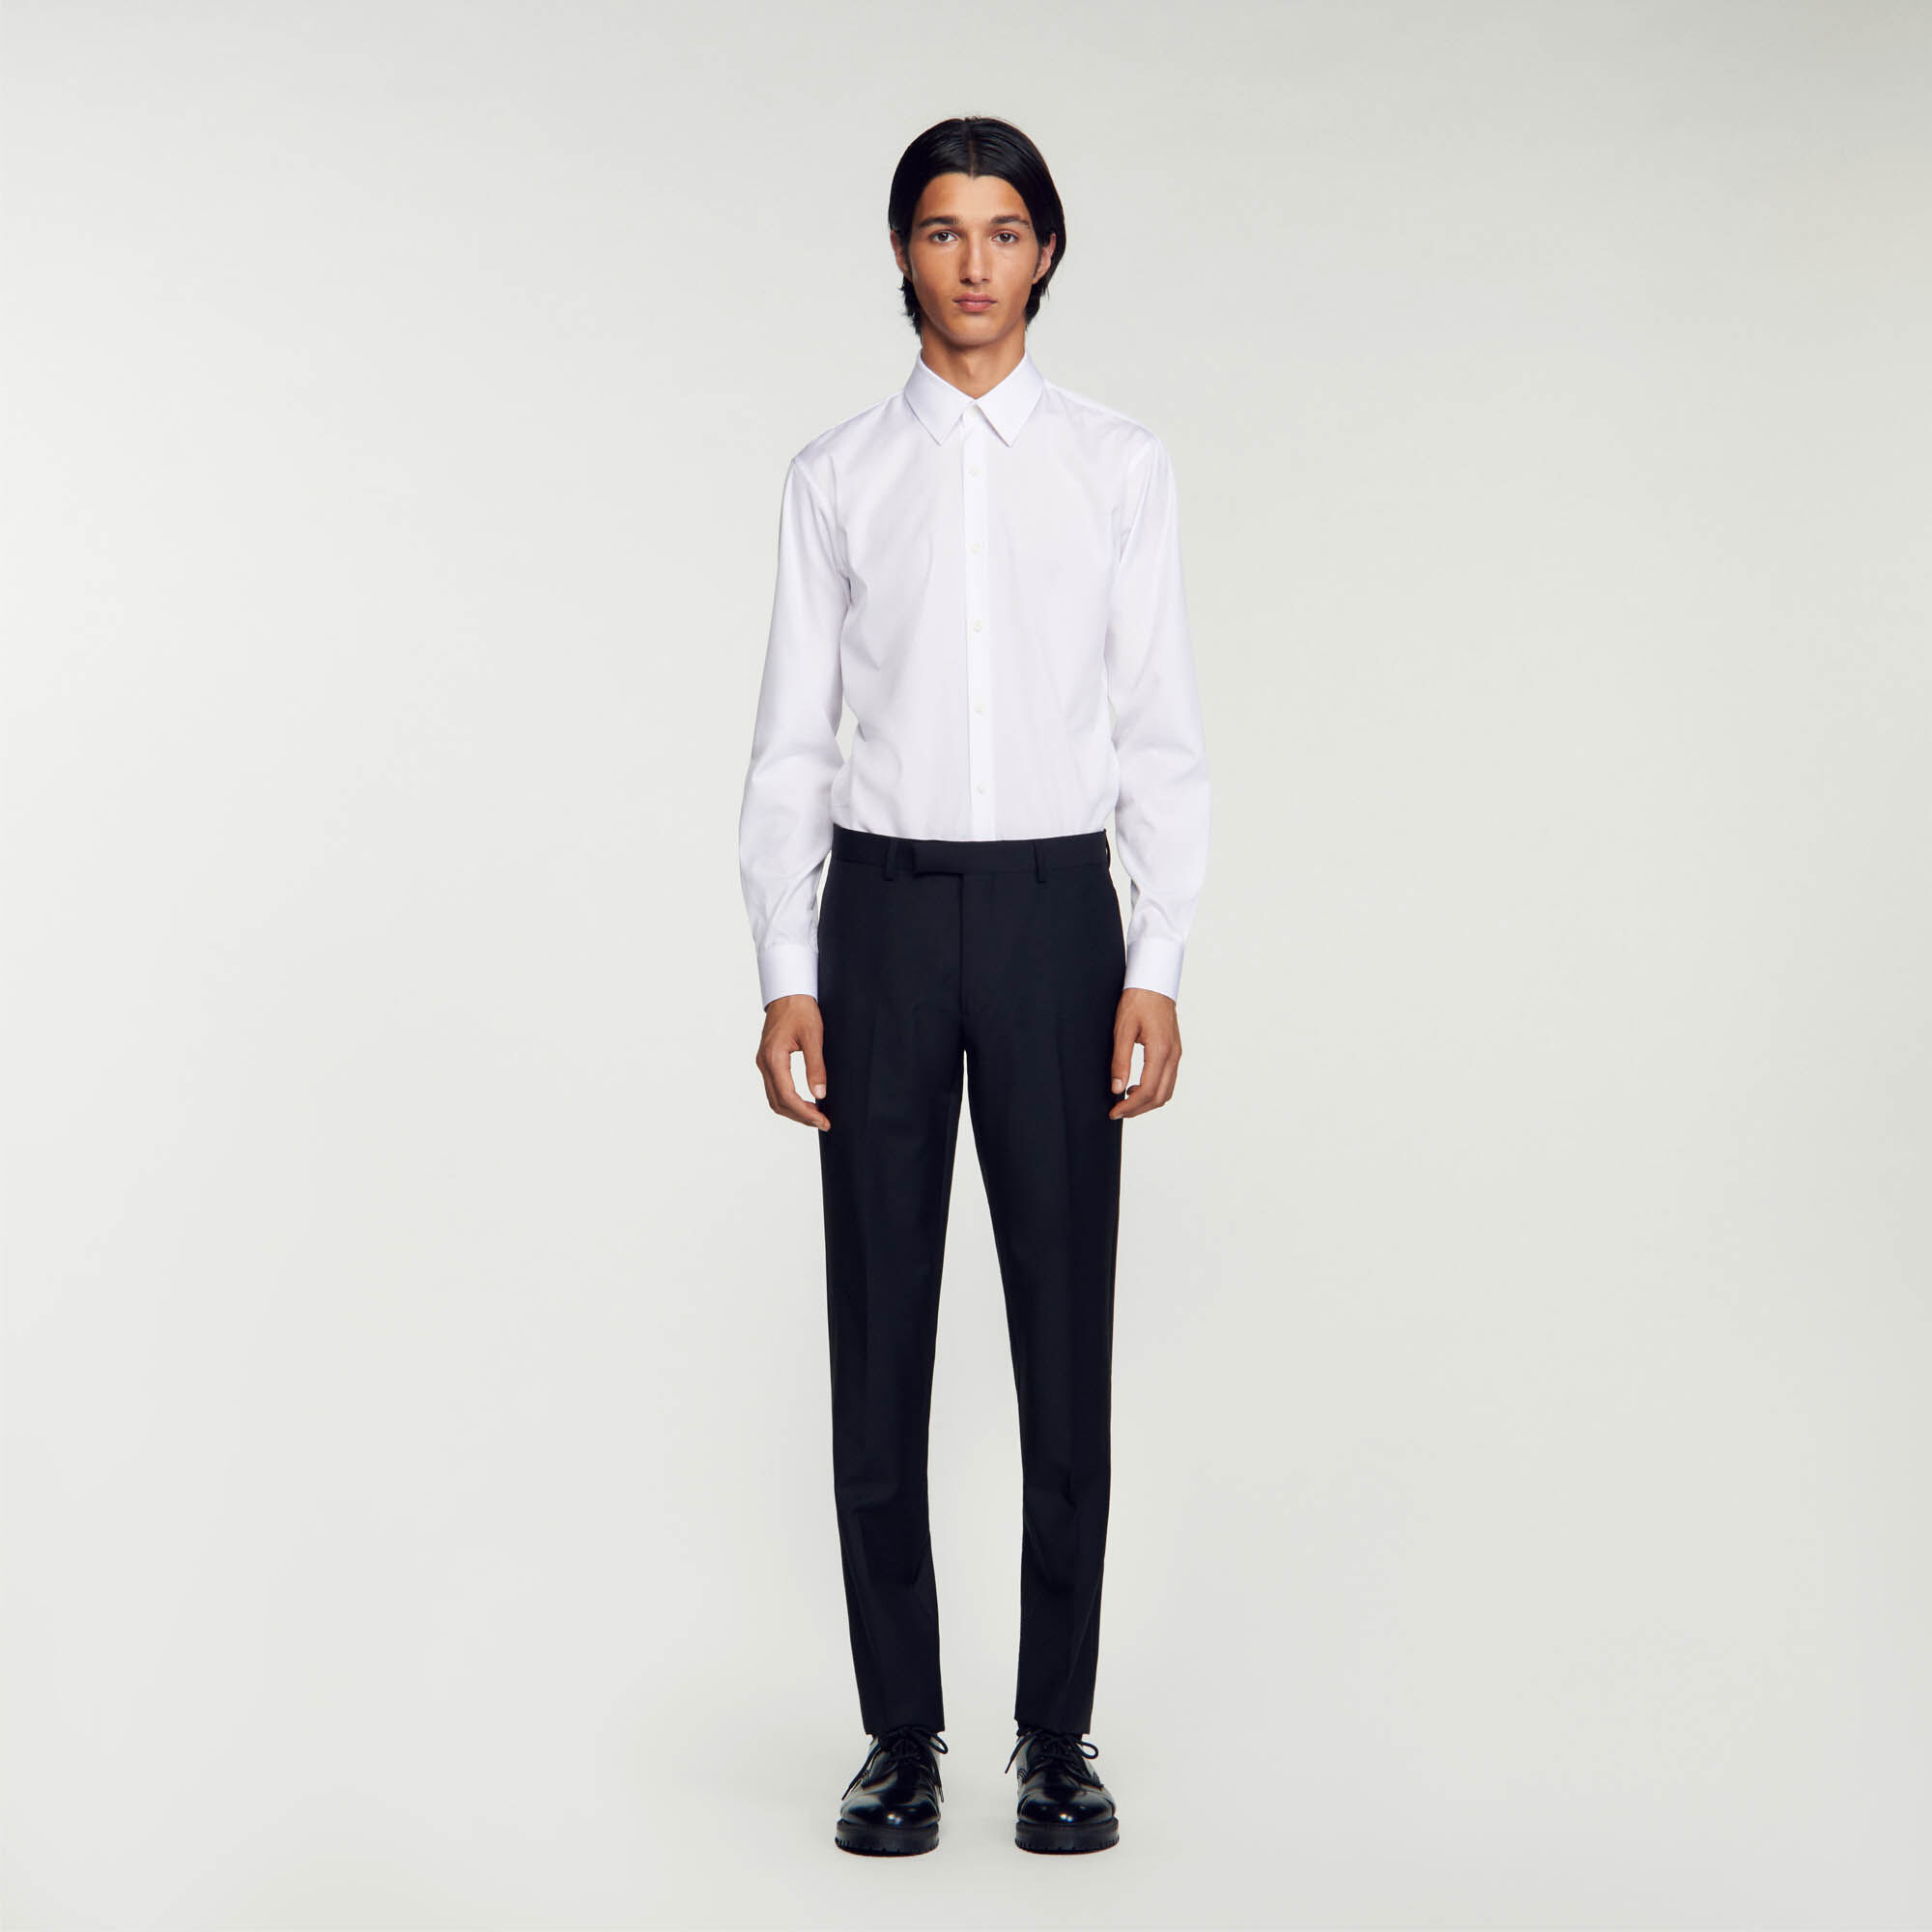 Off-White Havana Suit in Pure Cotton | SUITSUPPLY India